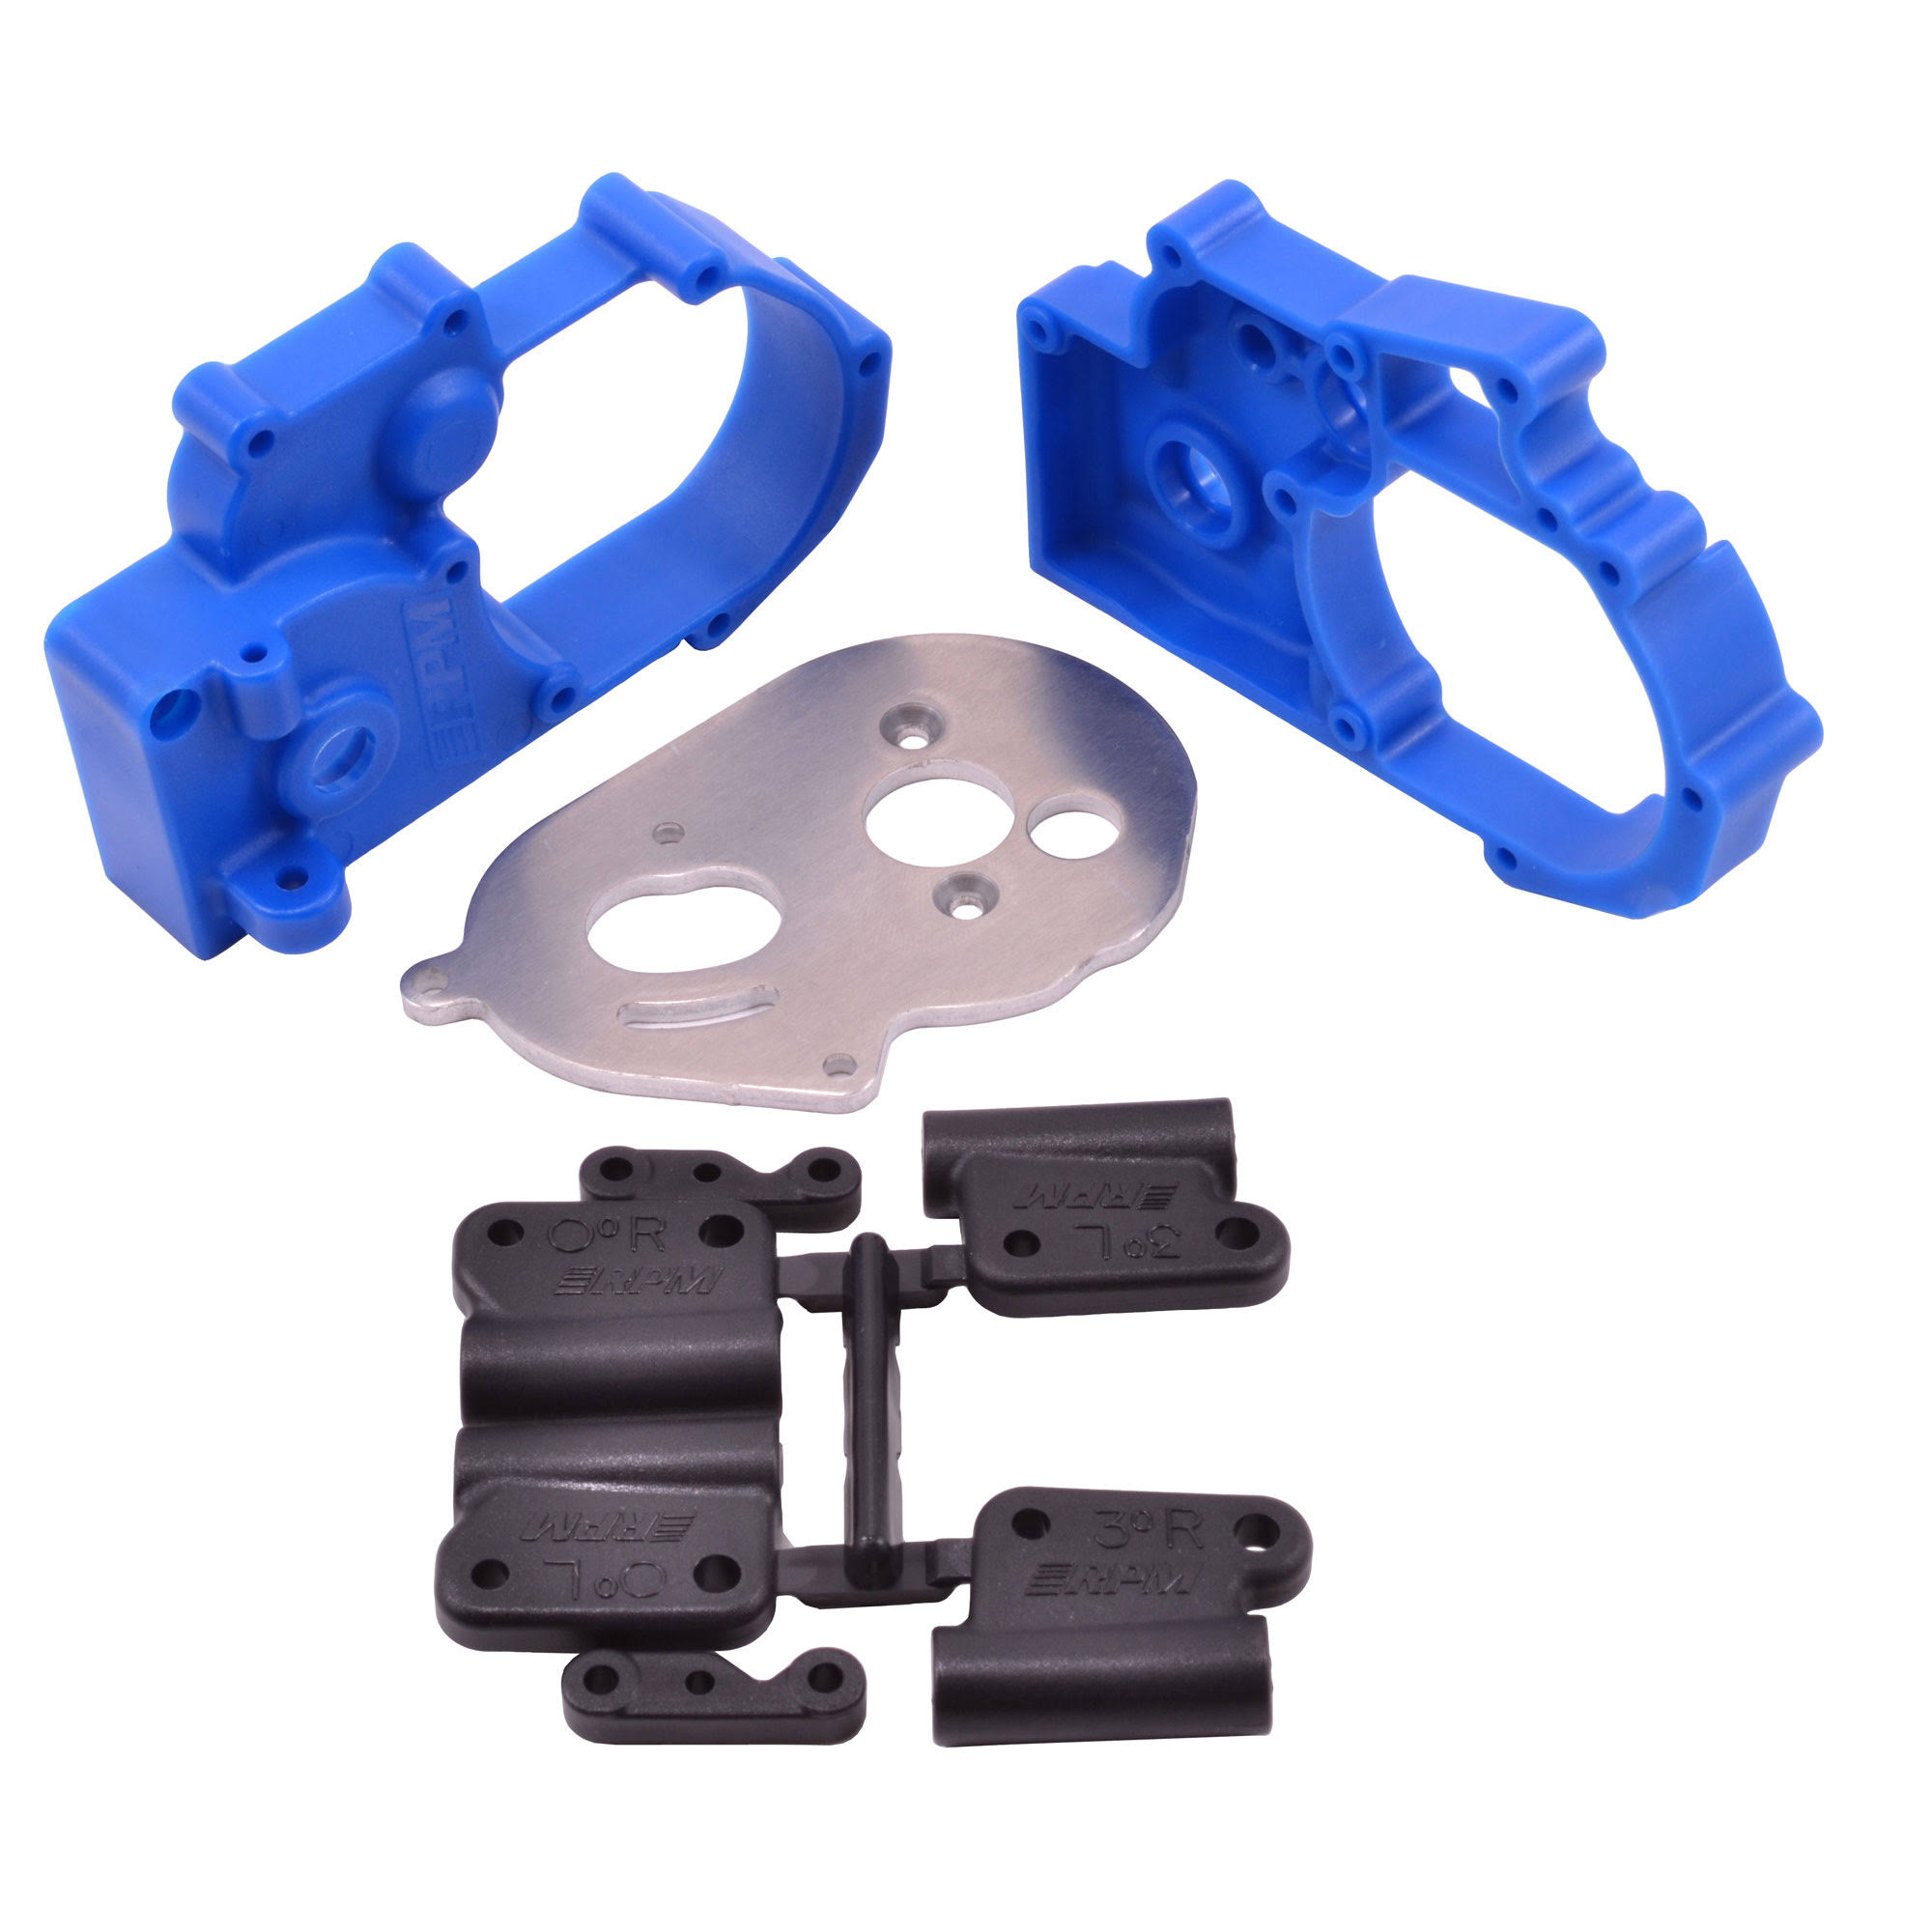 RPM Hybrid Gearbox Traxxas 2WD Electric Housing and Rear Mounts - Blue